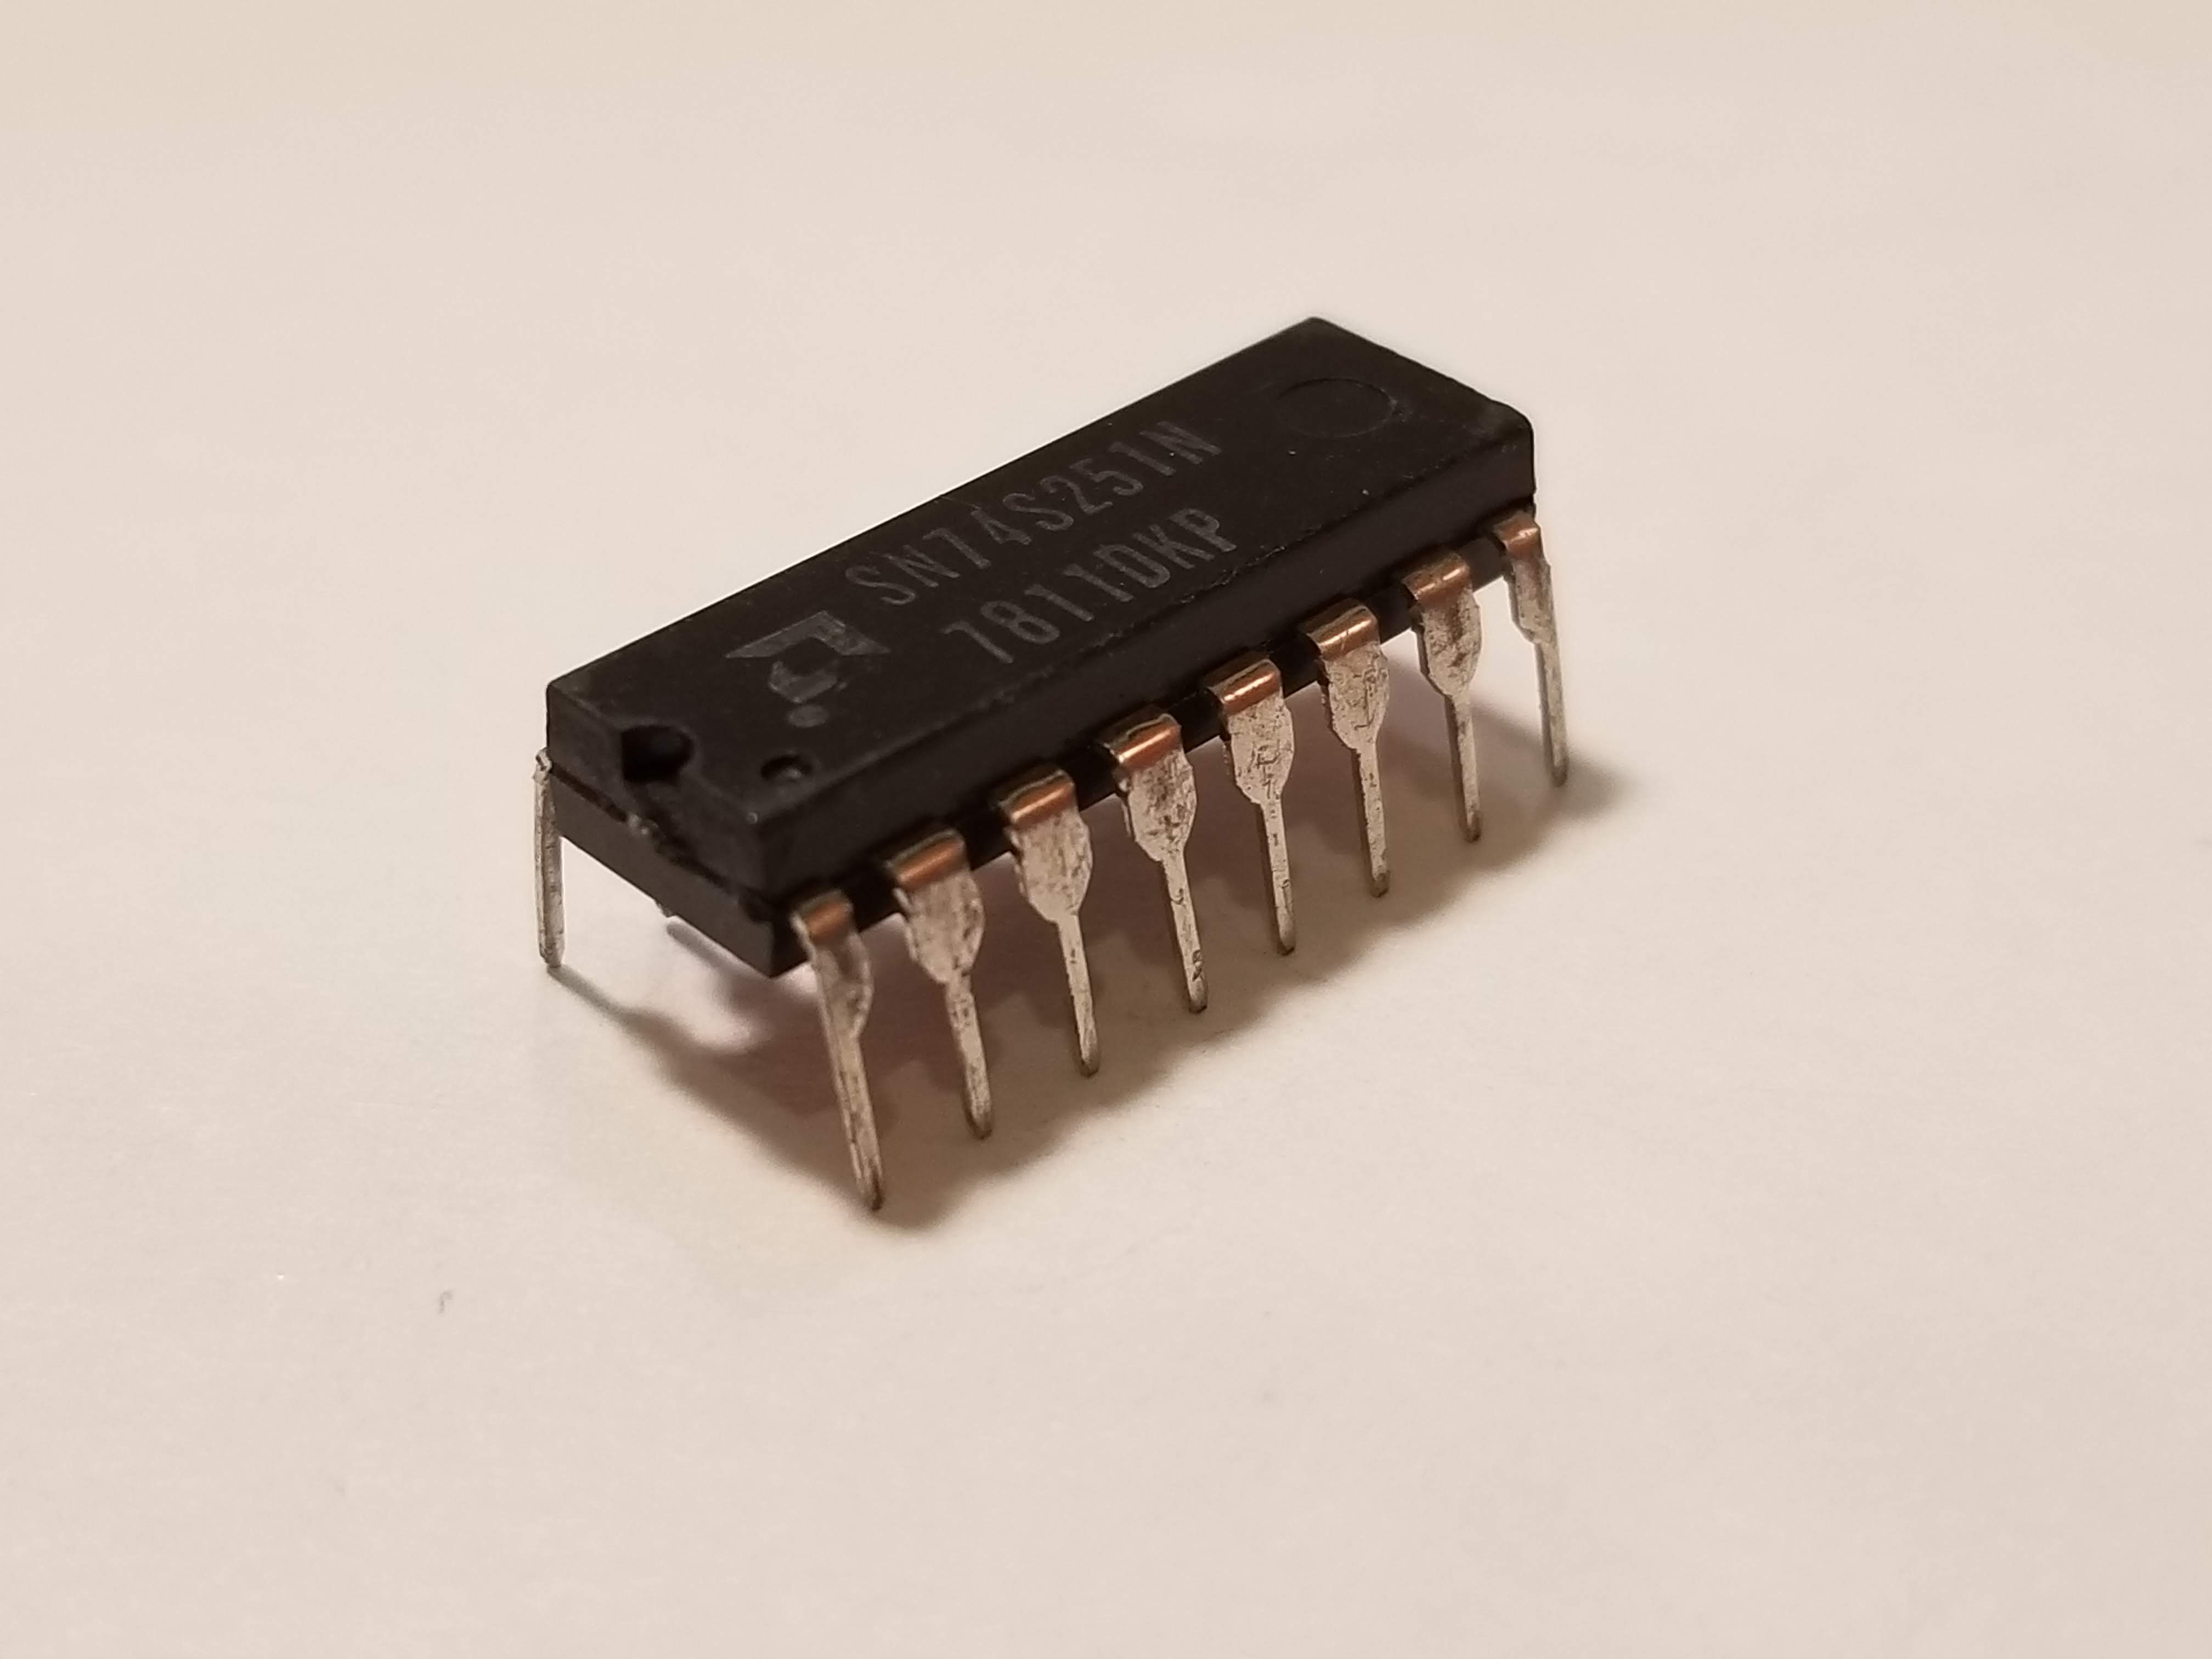 Picture of 74251 Tristate 8-to-1 Multiplexer